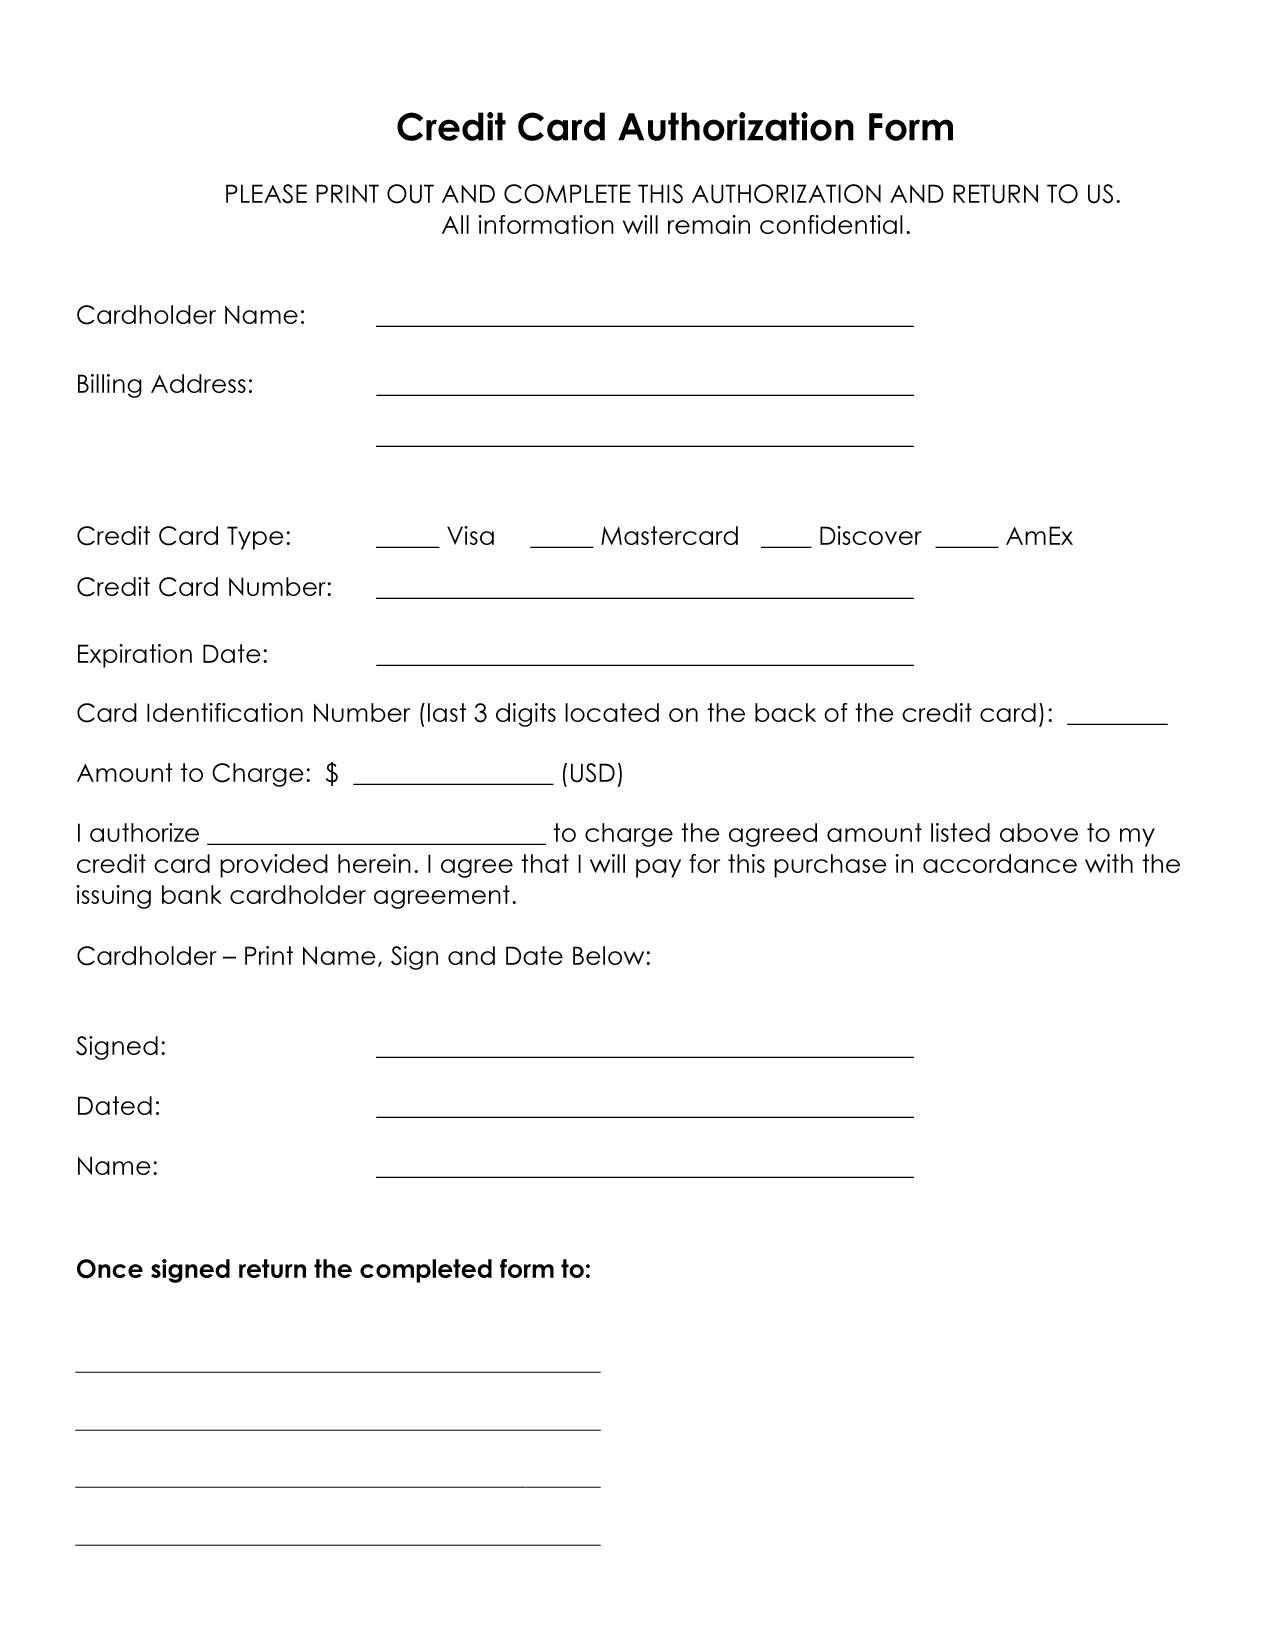 Credit Card Authorization Form Template In 2020 | Credit In Credit Card Payment Slip Template